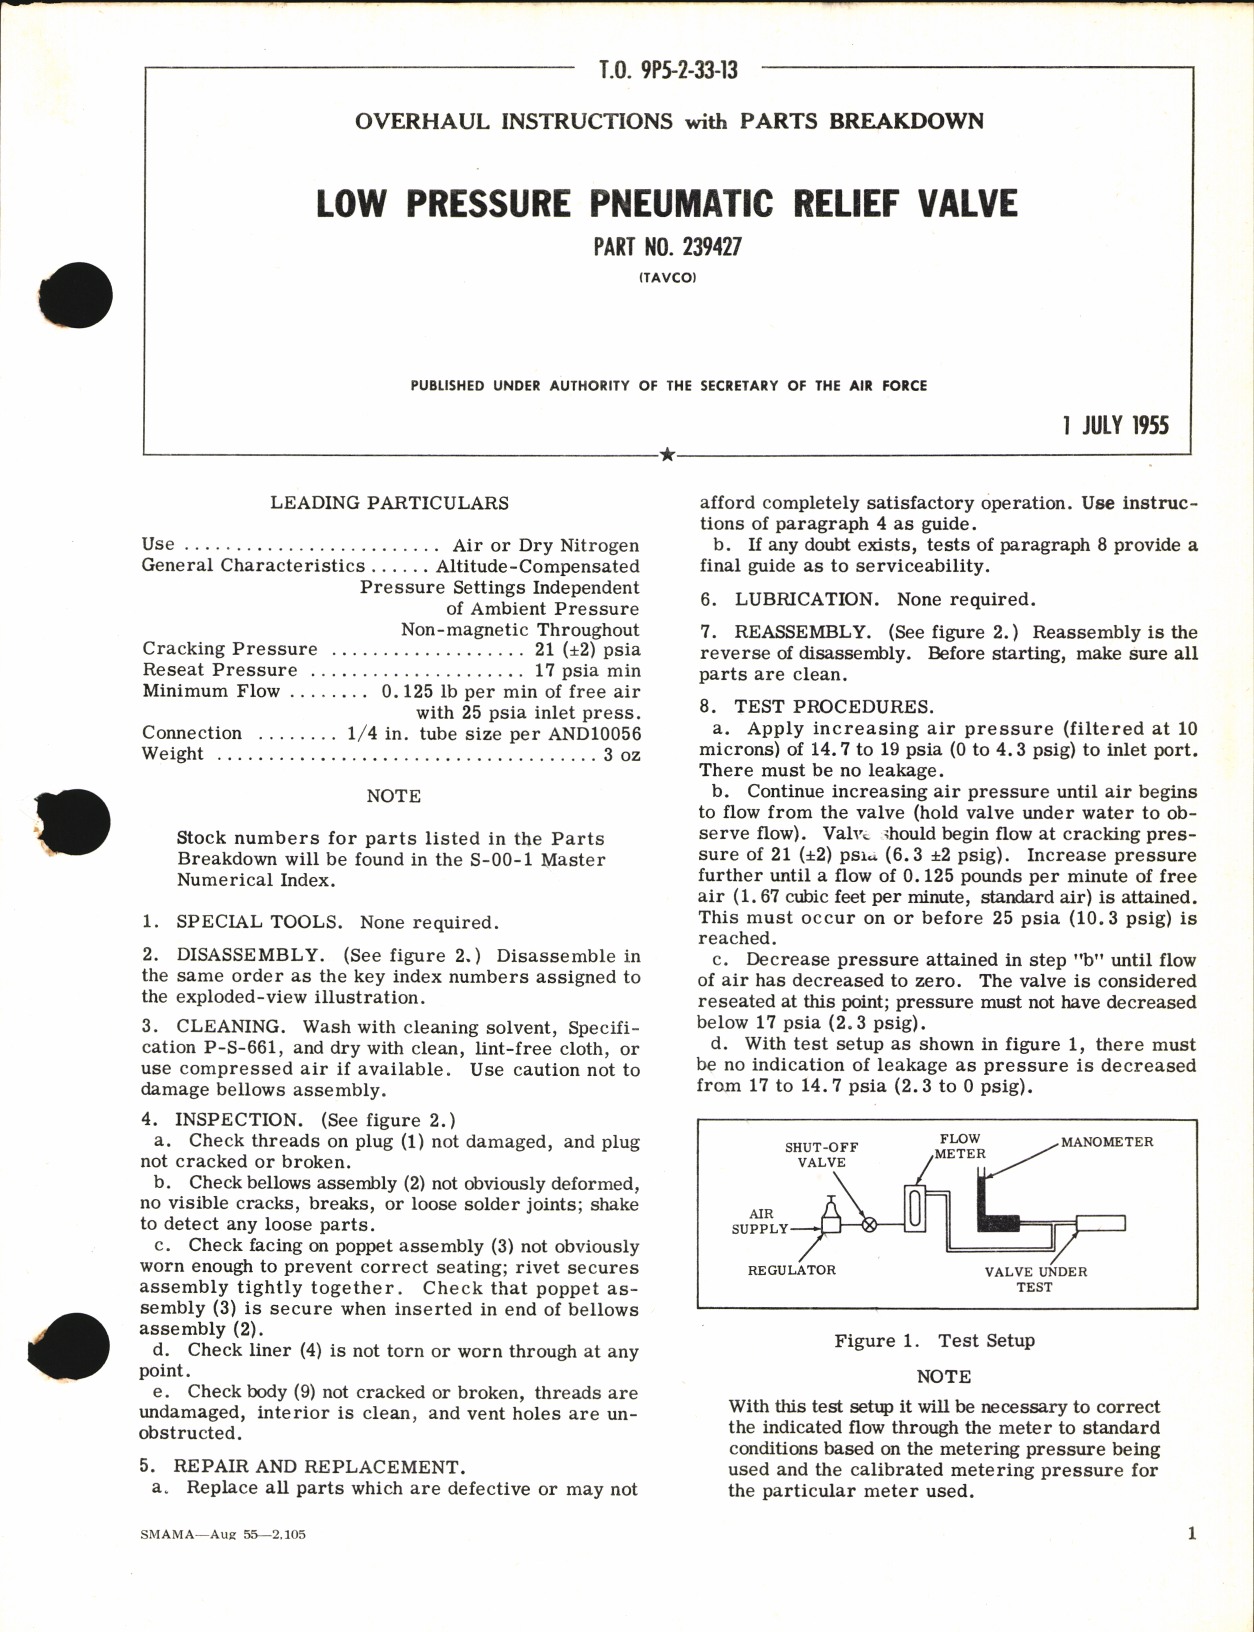 Sample page 1 from AirCorps Library document: Overhaul Instructions with Parts Breakdown for Low Pressure Pneumatic relief Valve Part No. 239427